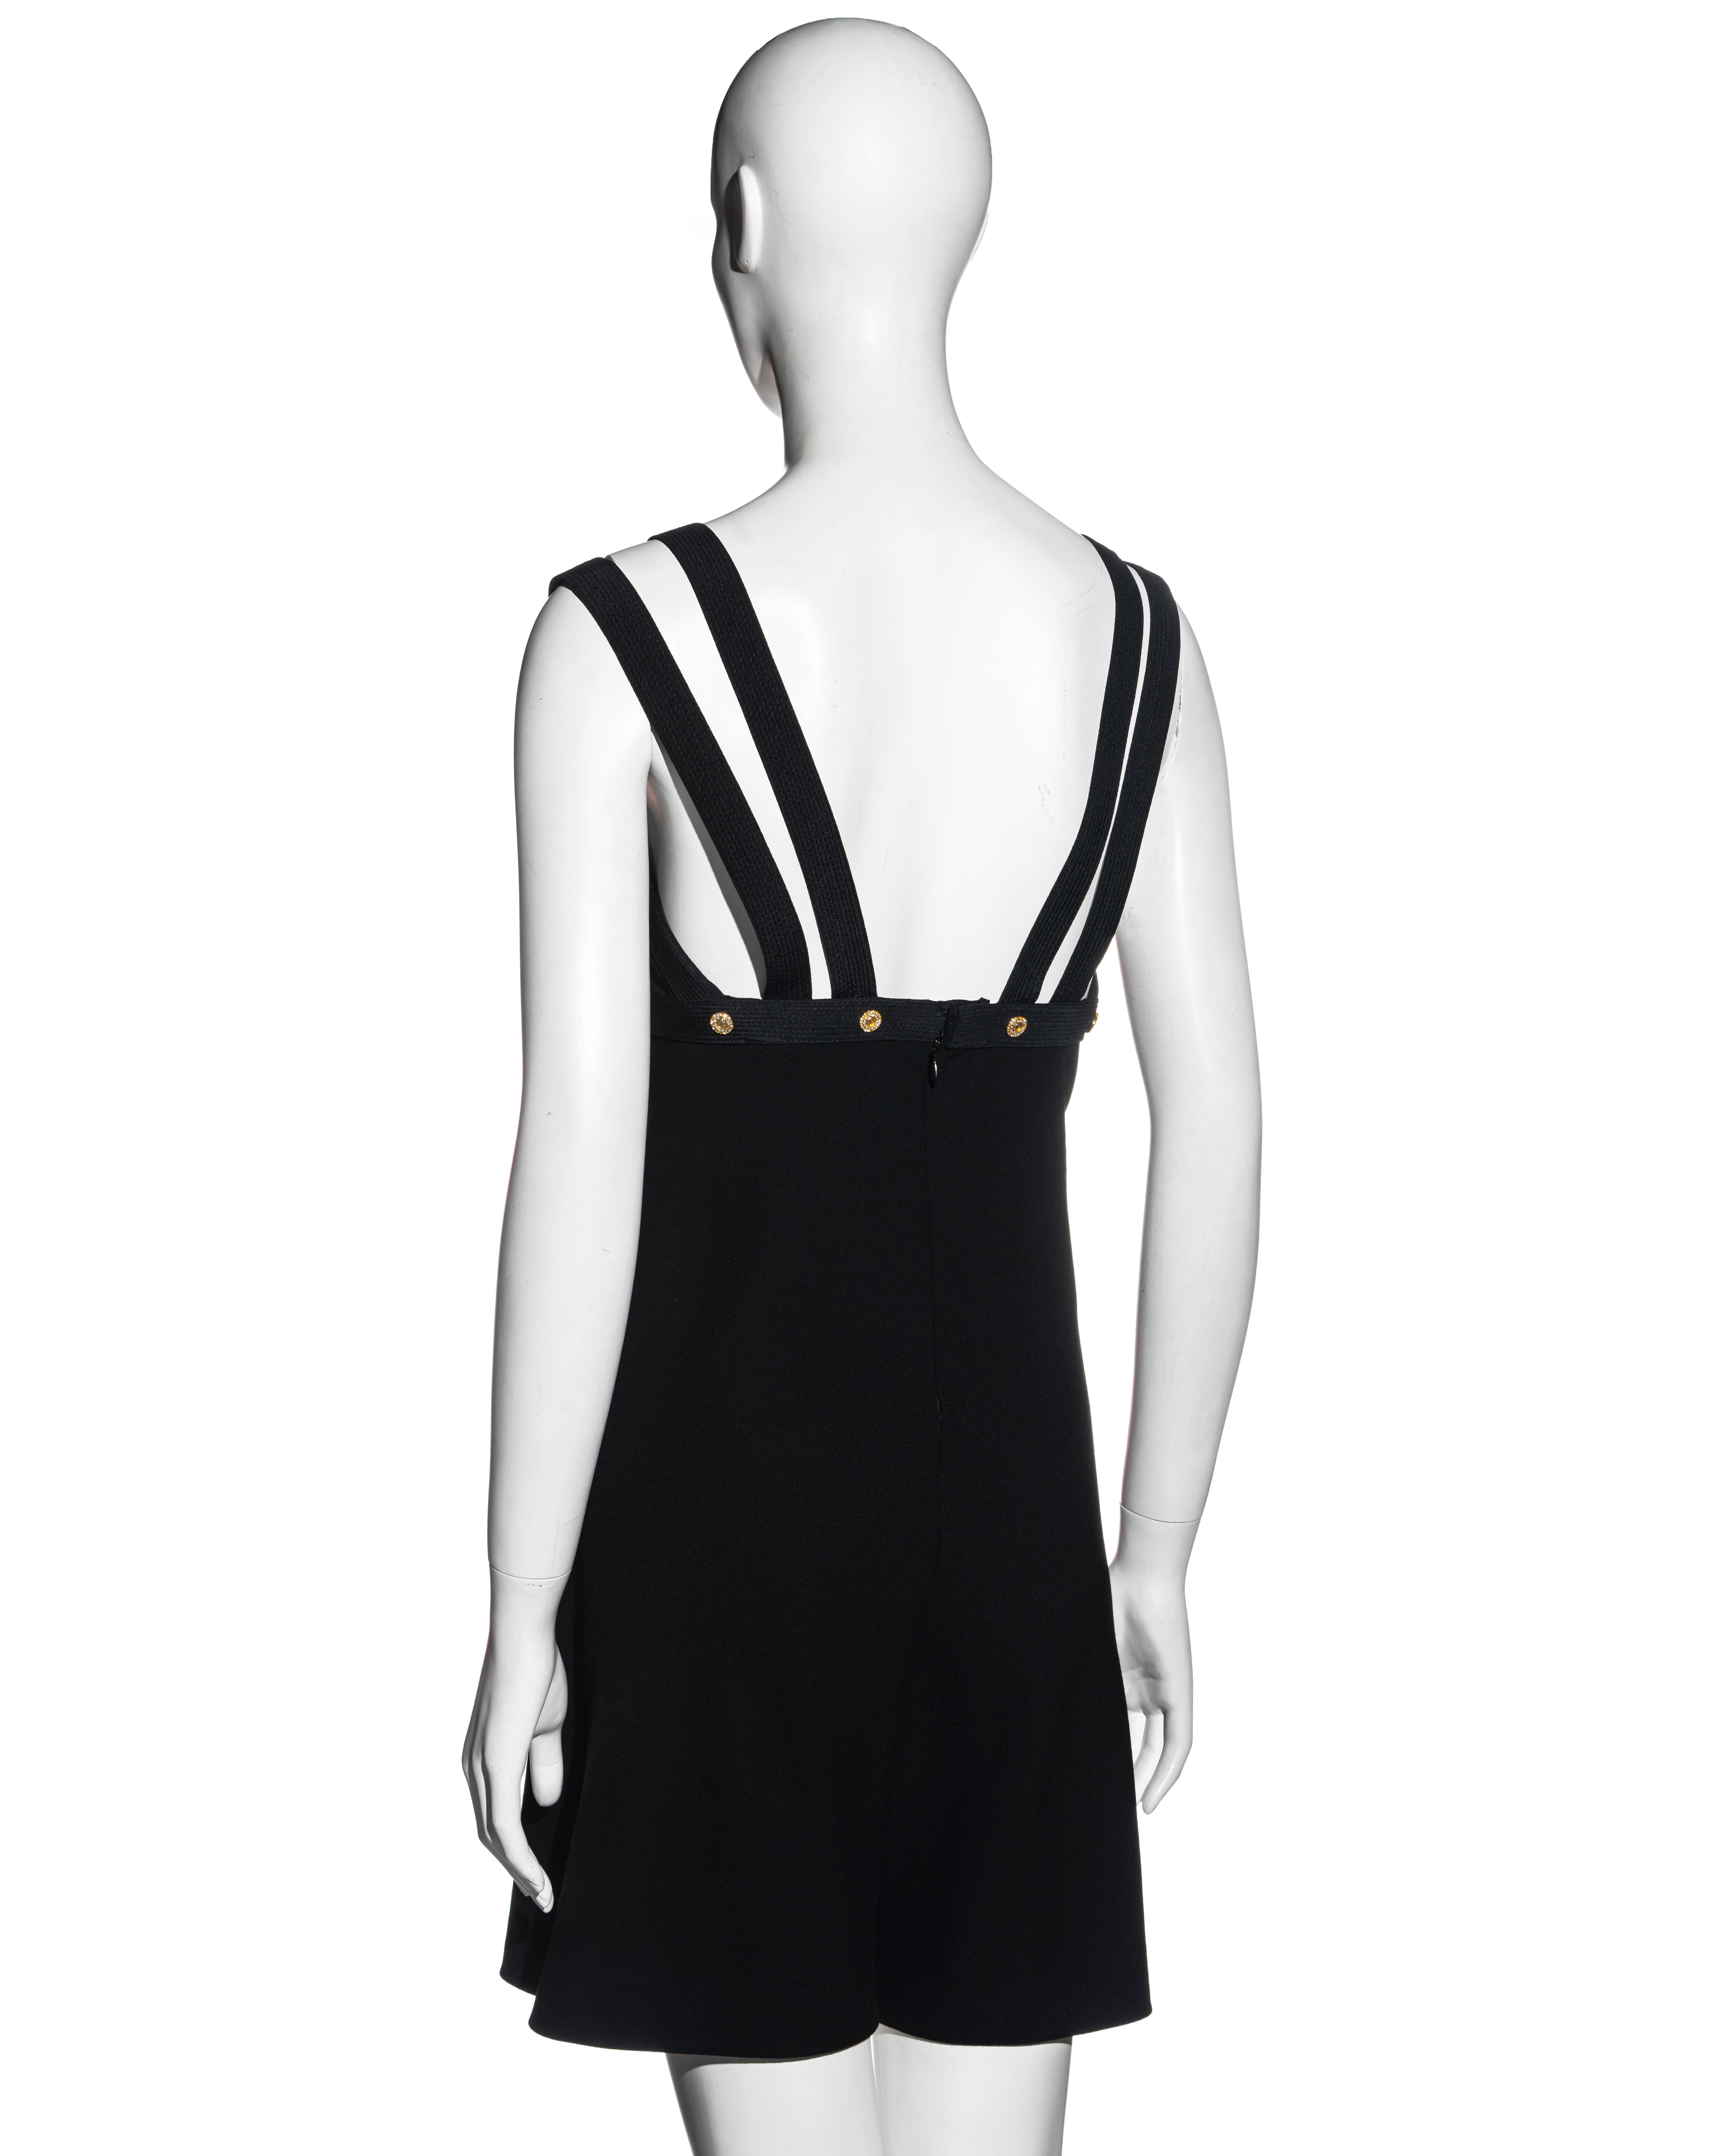 Gianni Versace black wool double strap playsuit with gold crystal studs, ss 1992 For Sale 2